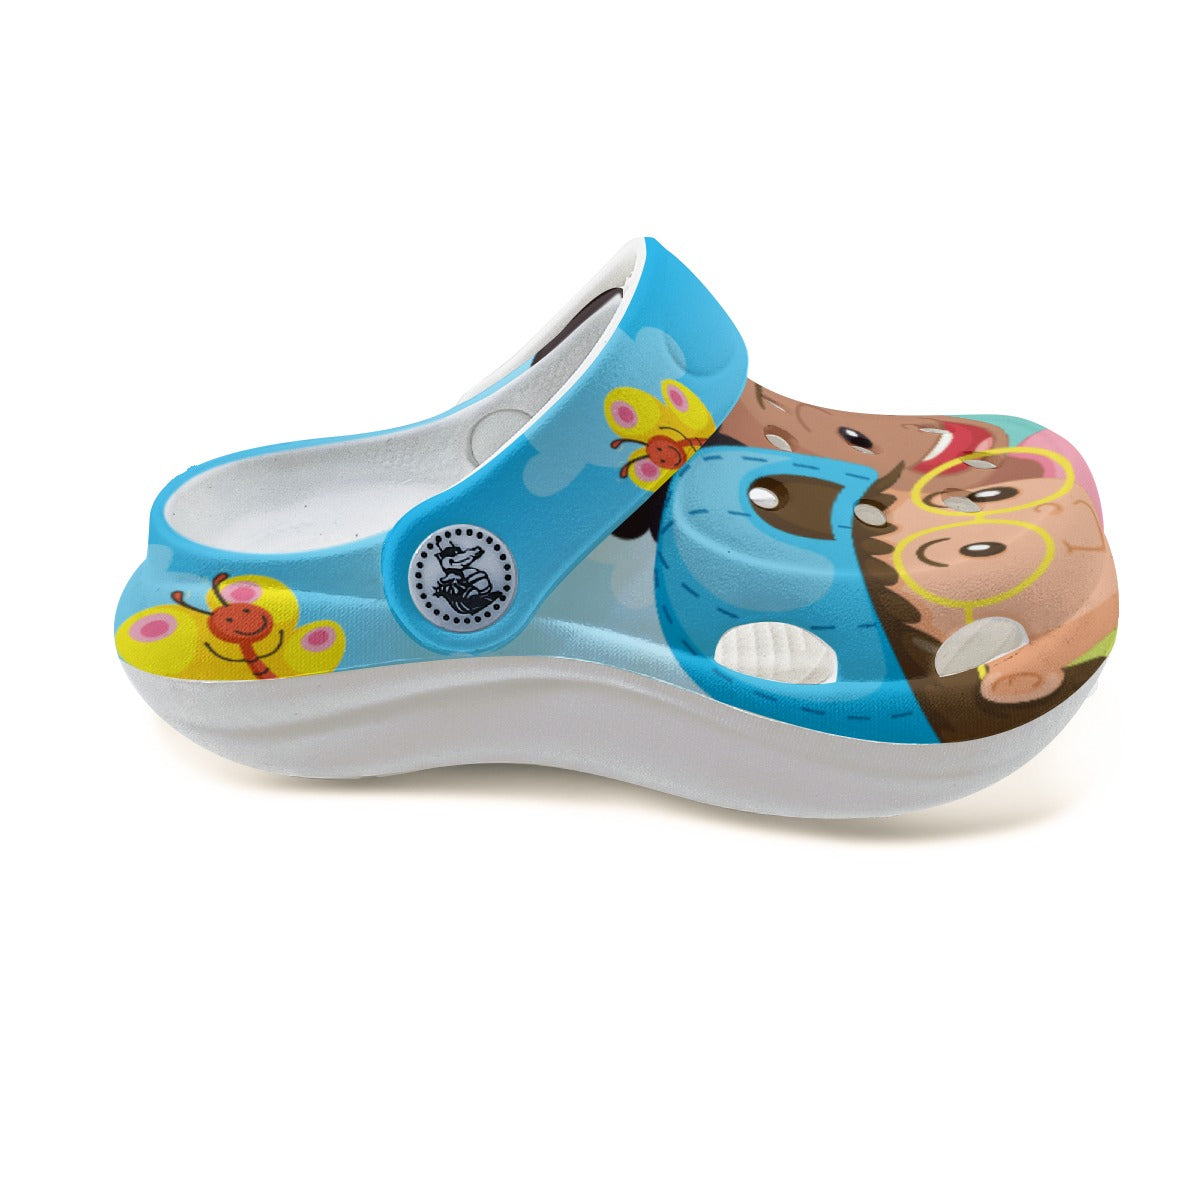 All-Over Print Kid's Classic Clogs